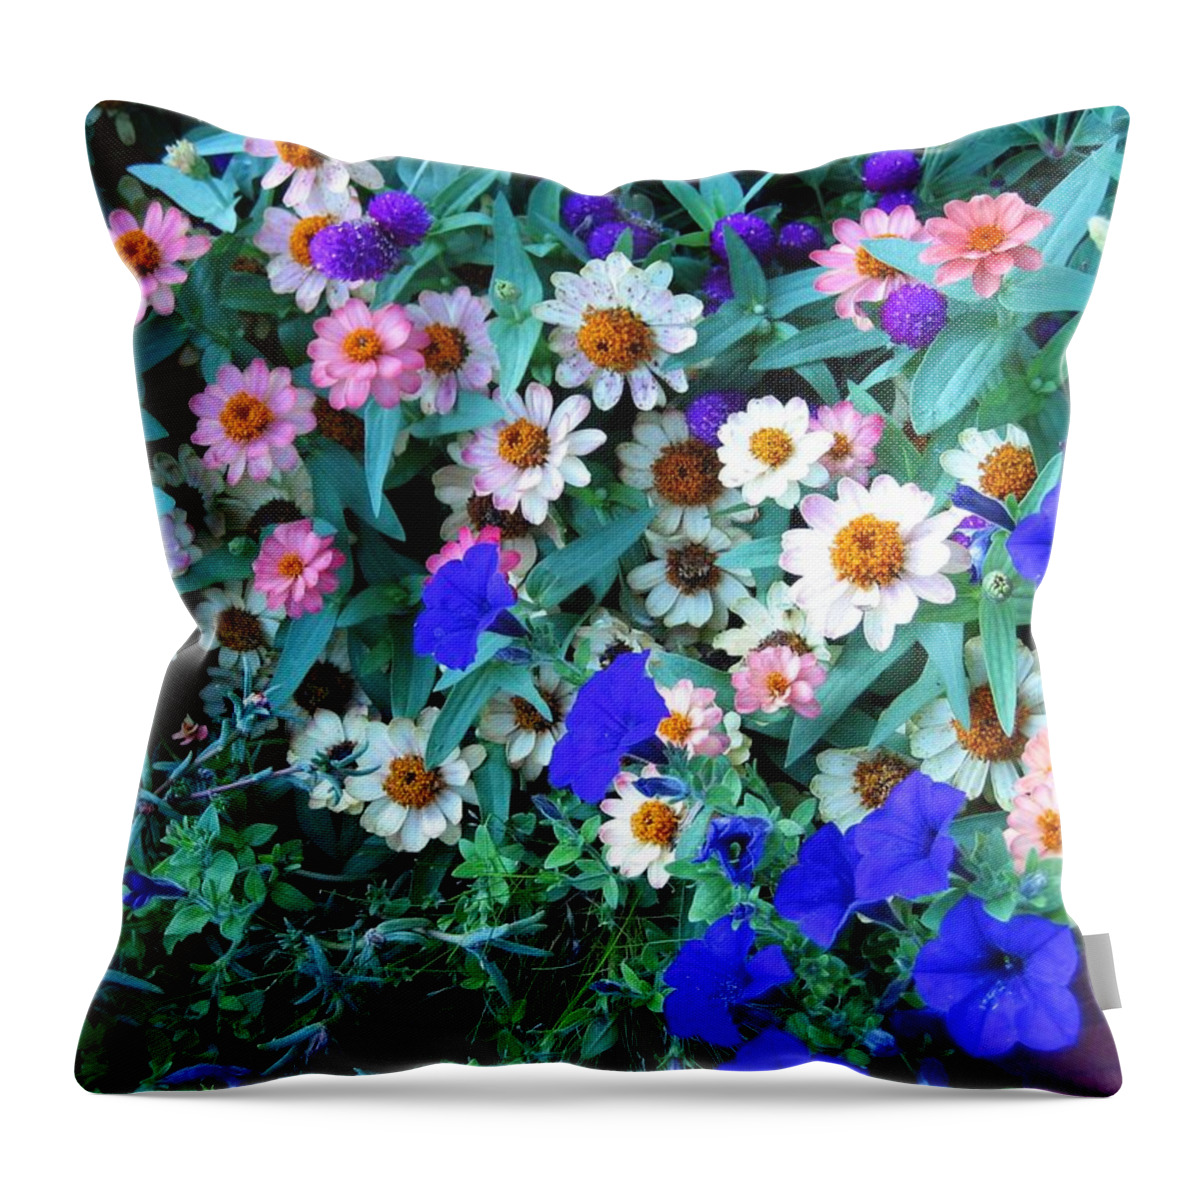 Flowers Throw Pillow featuring the photograph Pretty Posies by Sherry Oliver